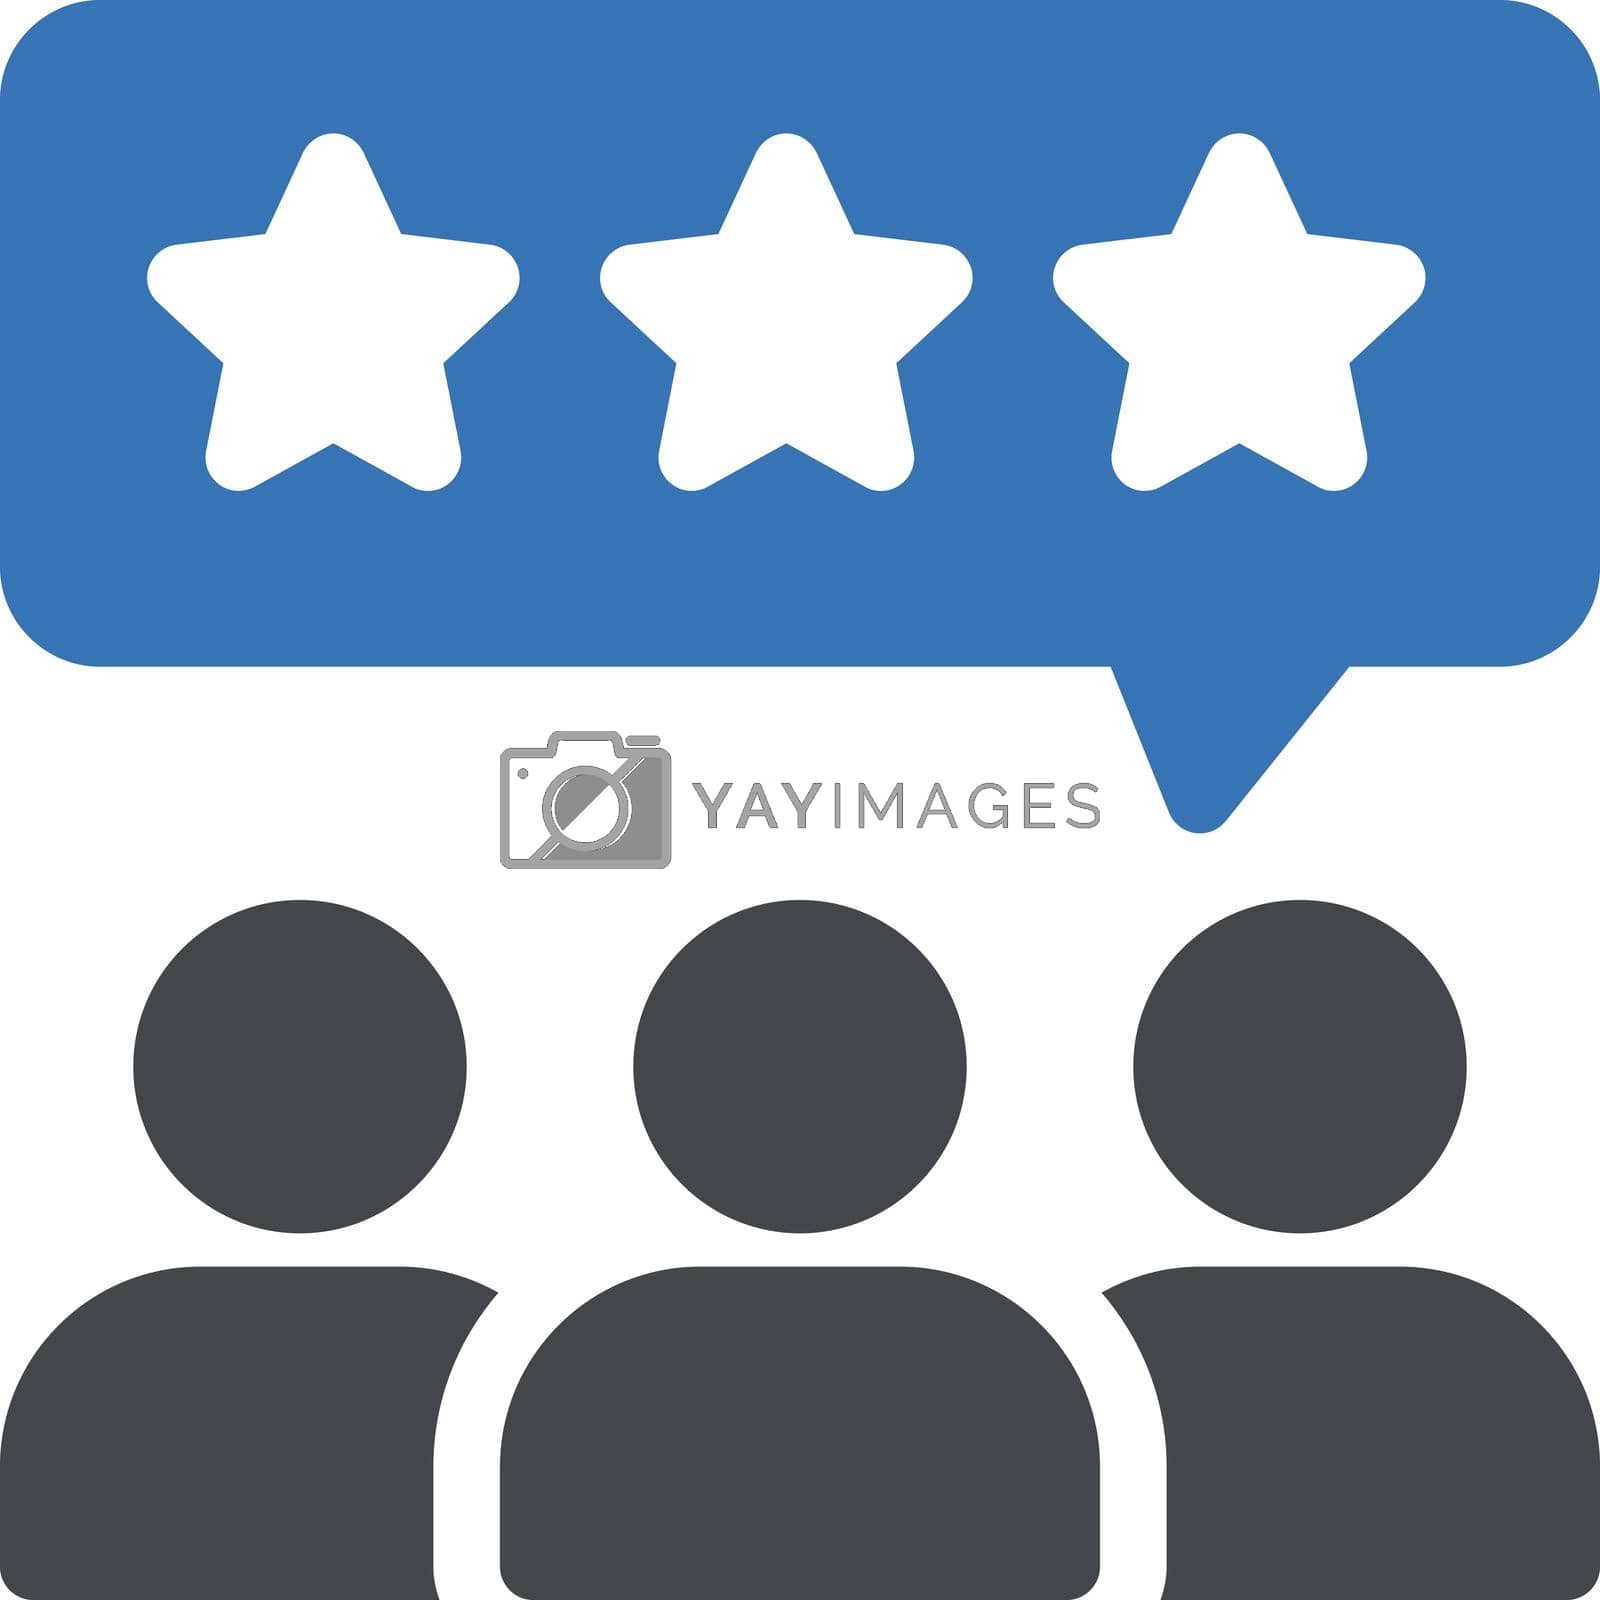 Royalty free image of rating by vectorstall